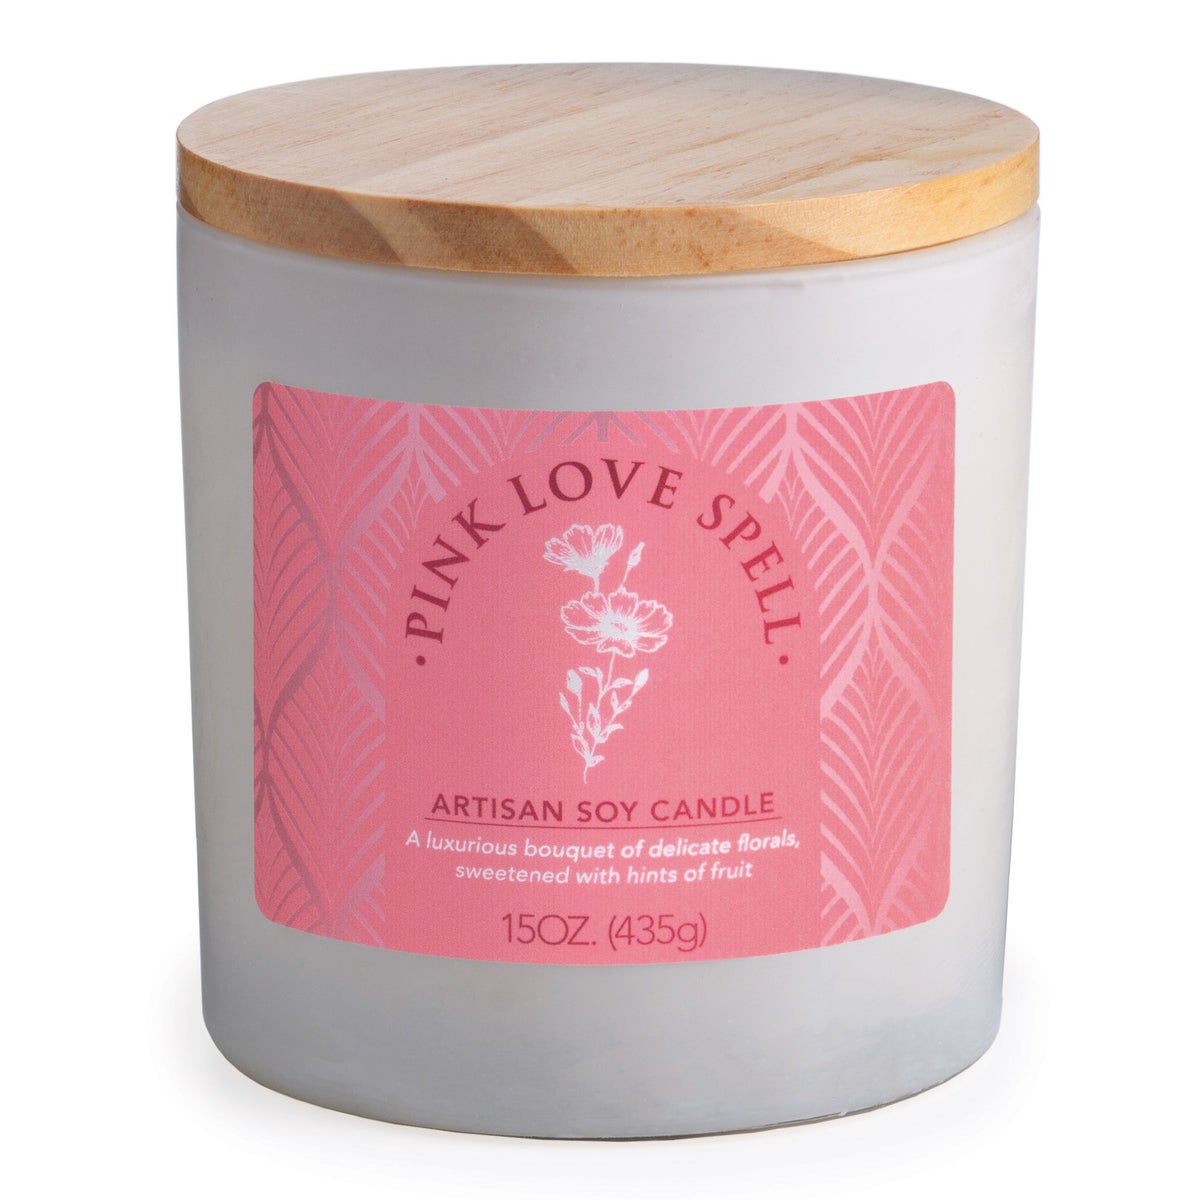 Limited Edition Spring Candle 15 oz - Pink Love Spell